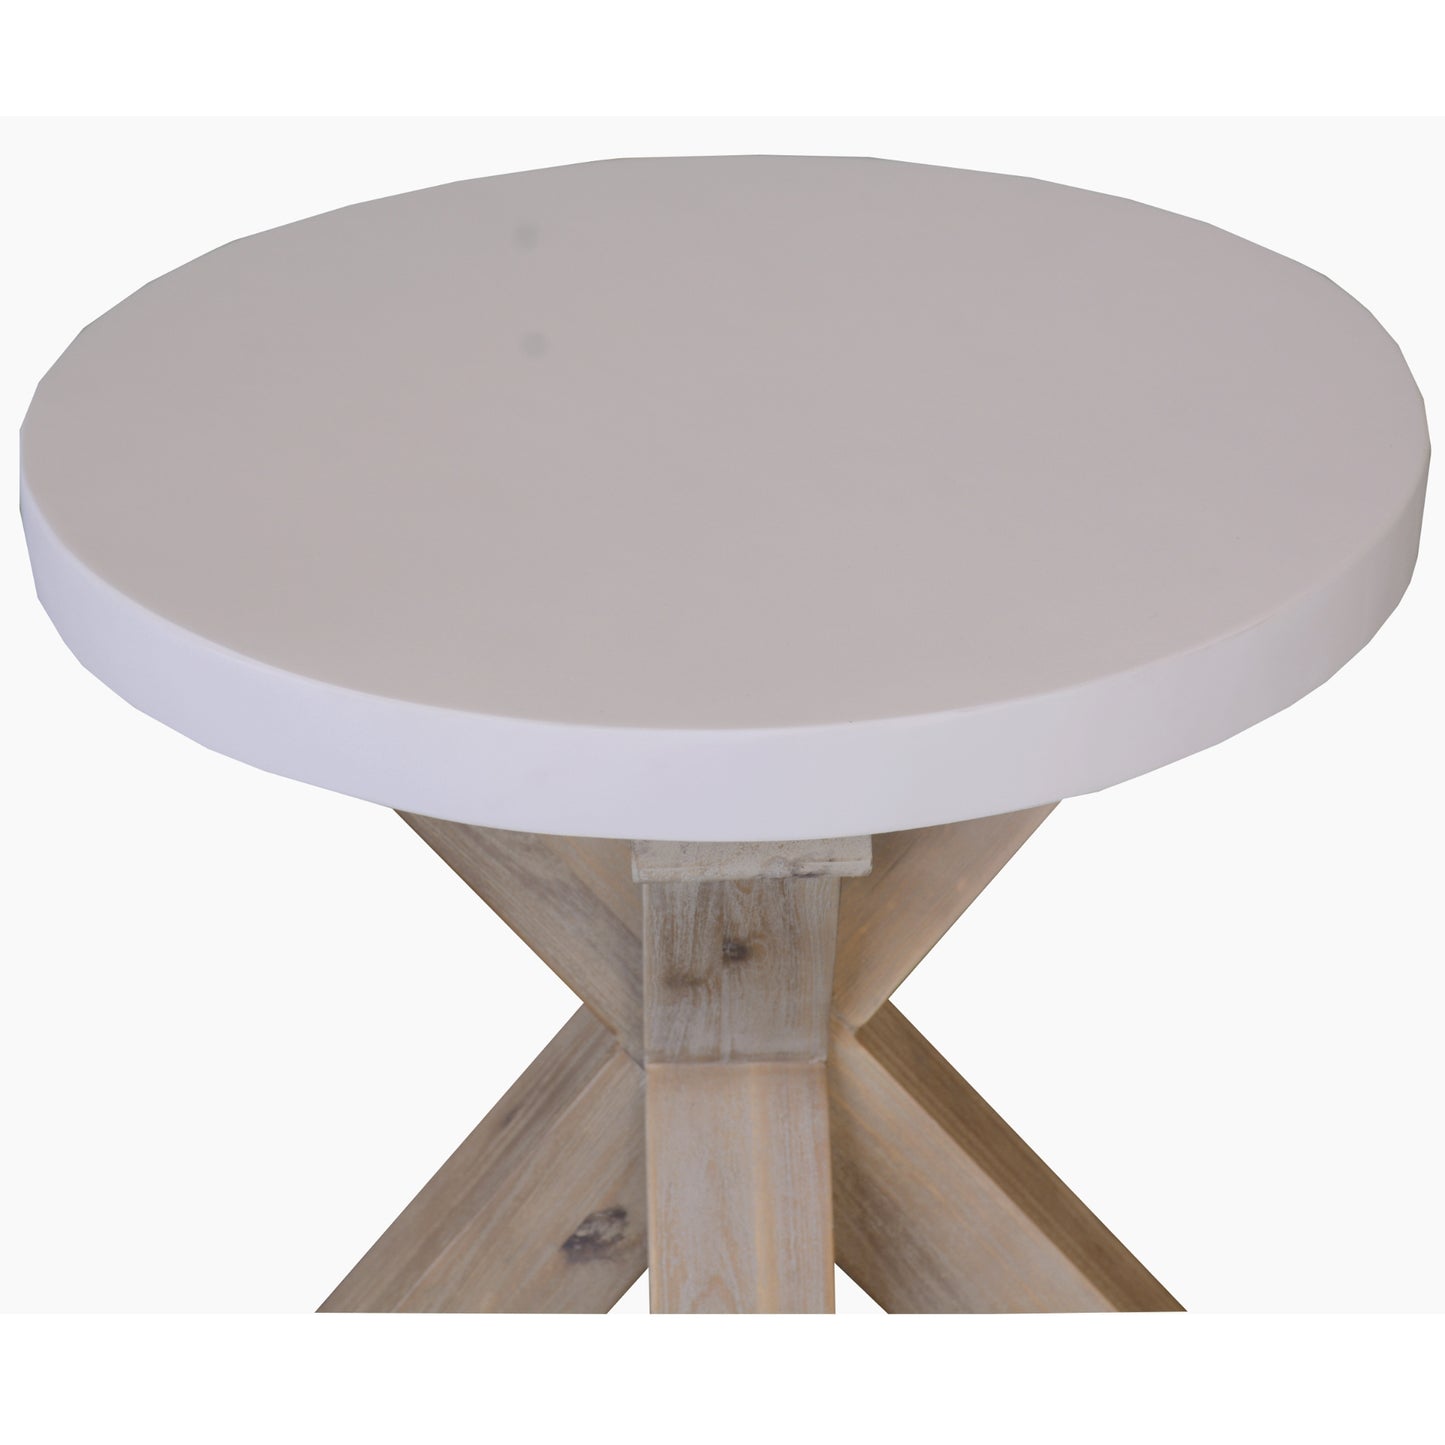 Stony 50cm Round Lamp Table with Concrete Top - White